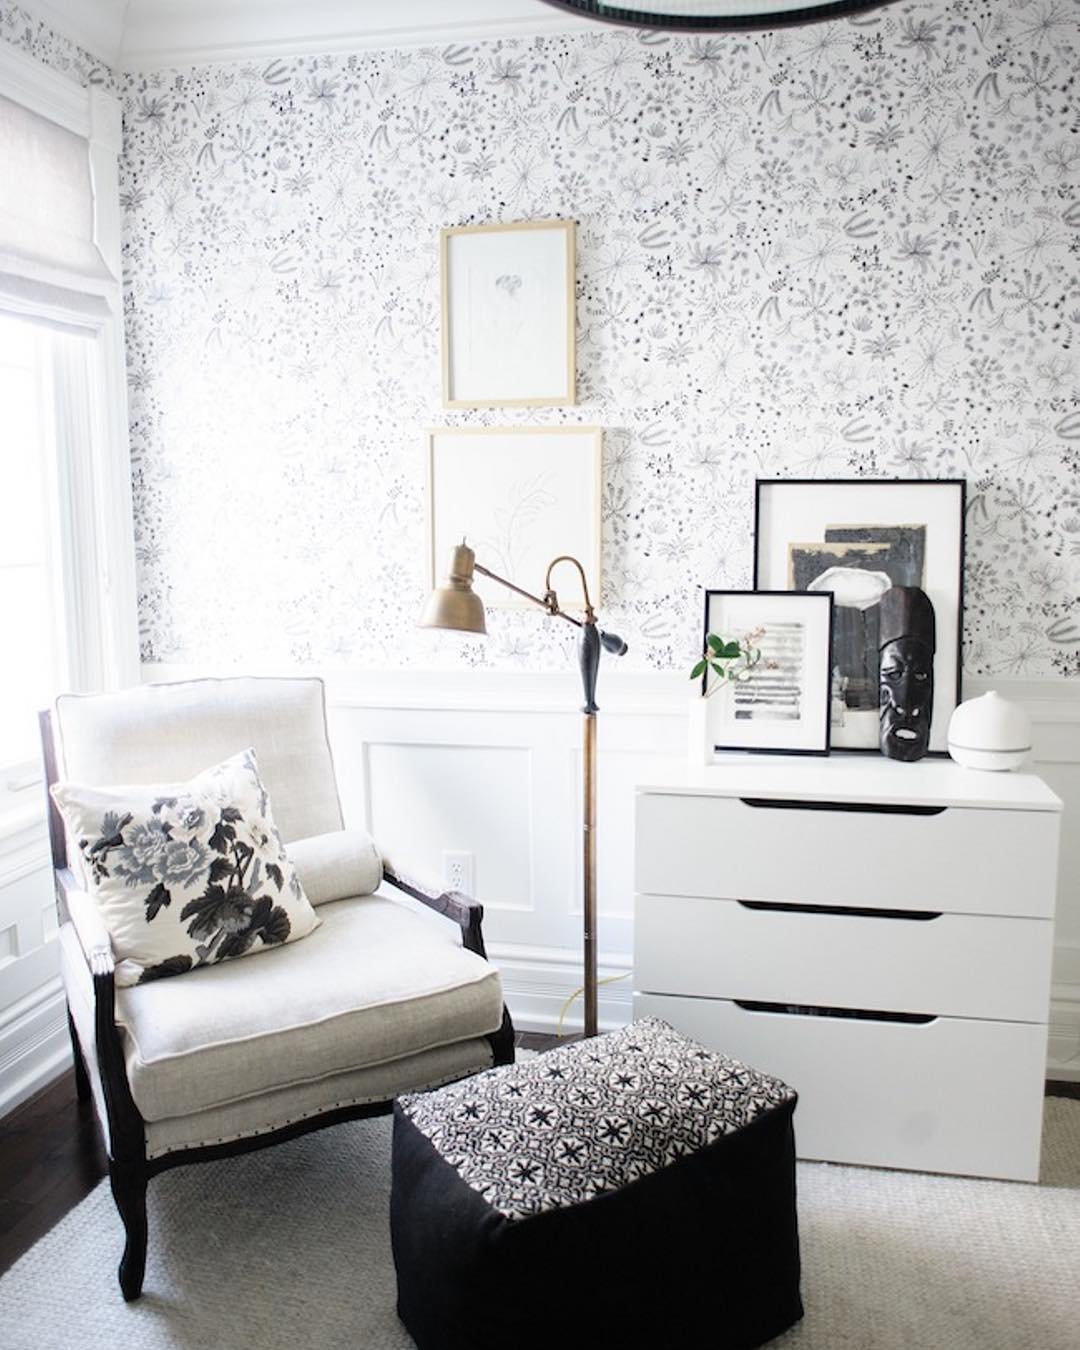 Cozy Reading Chair and Standing Lamp in Corner of Home Office. Photo by Instagram user @arianna_belle